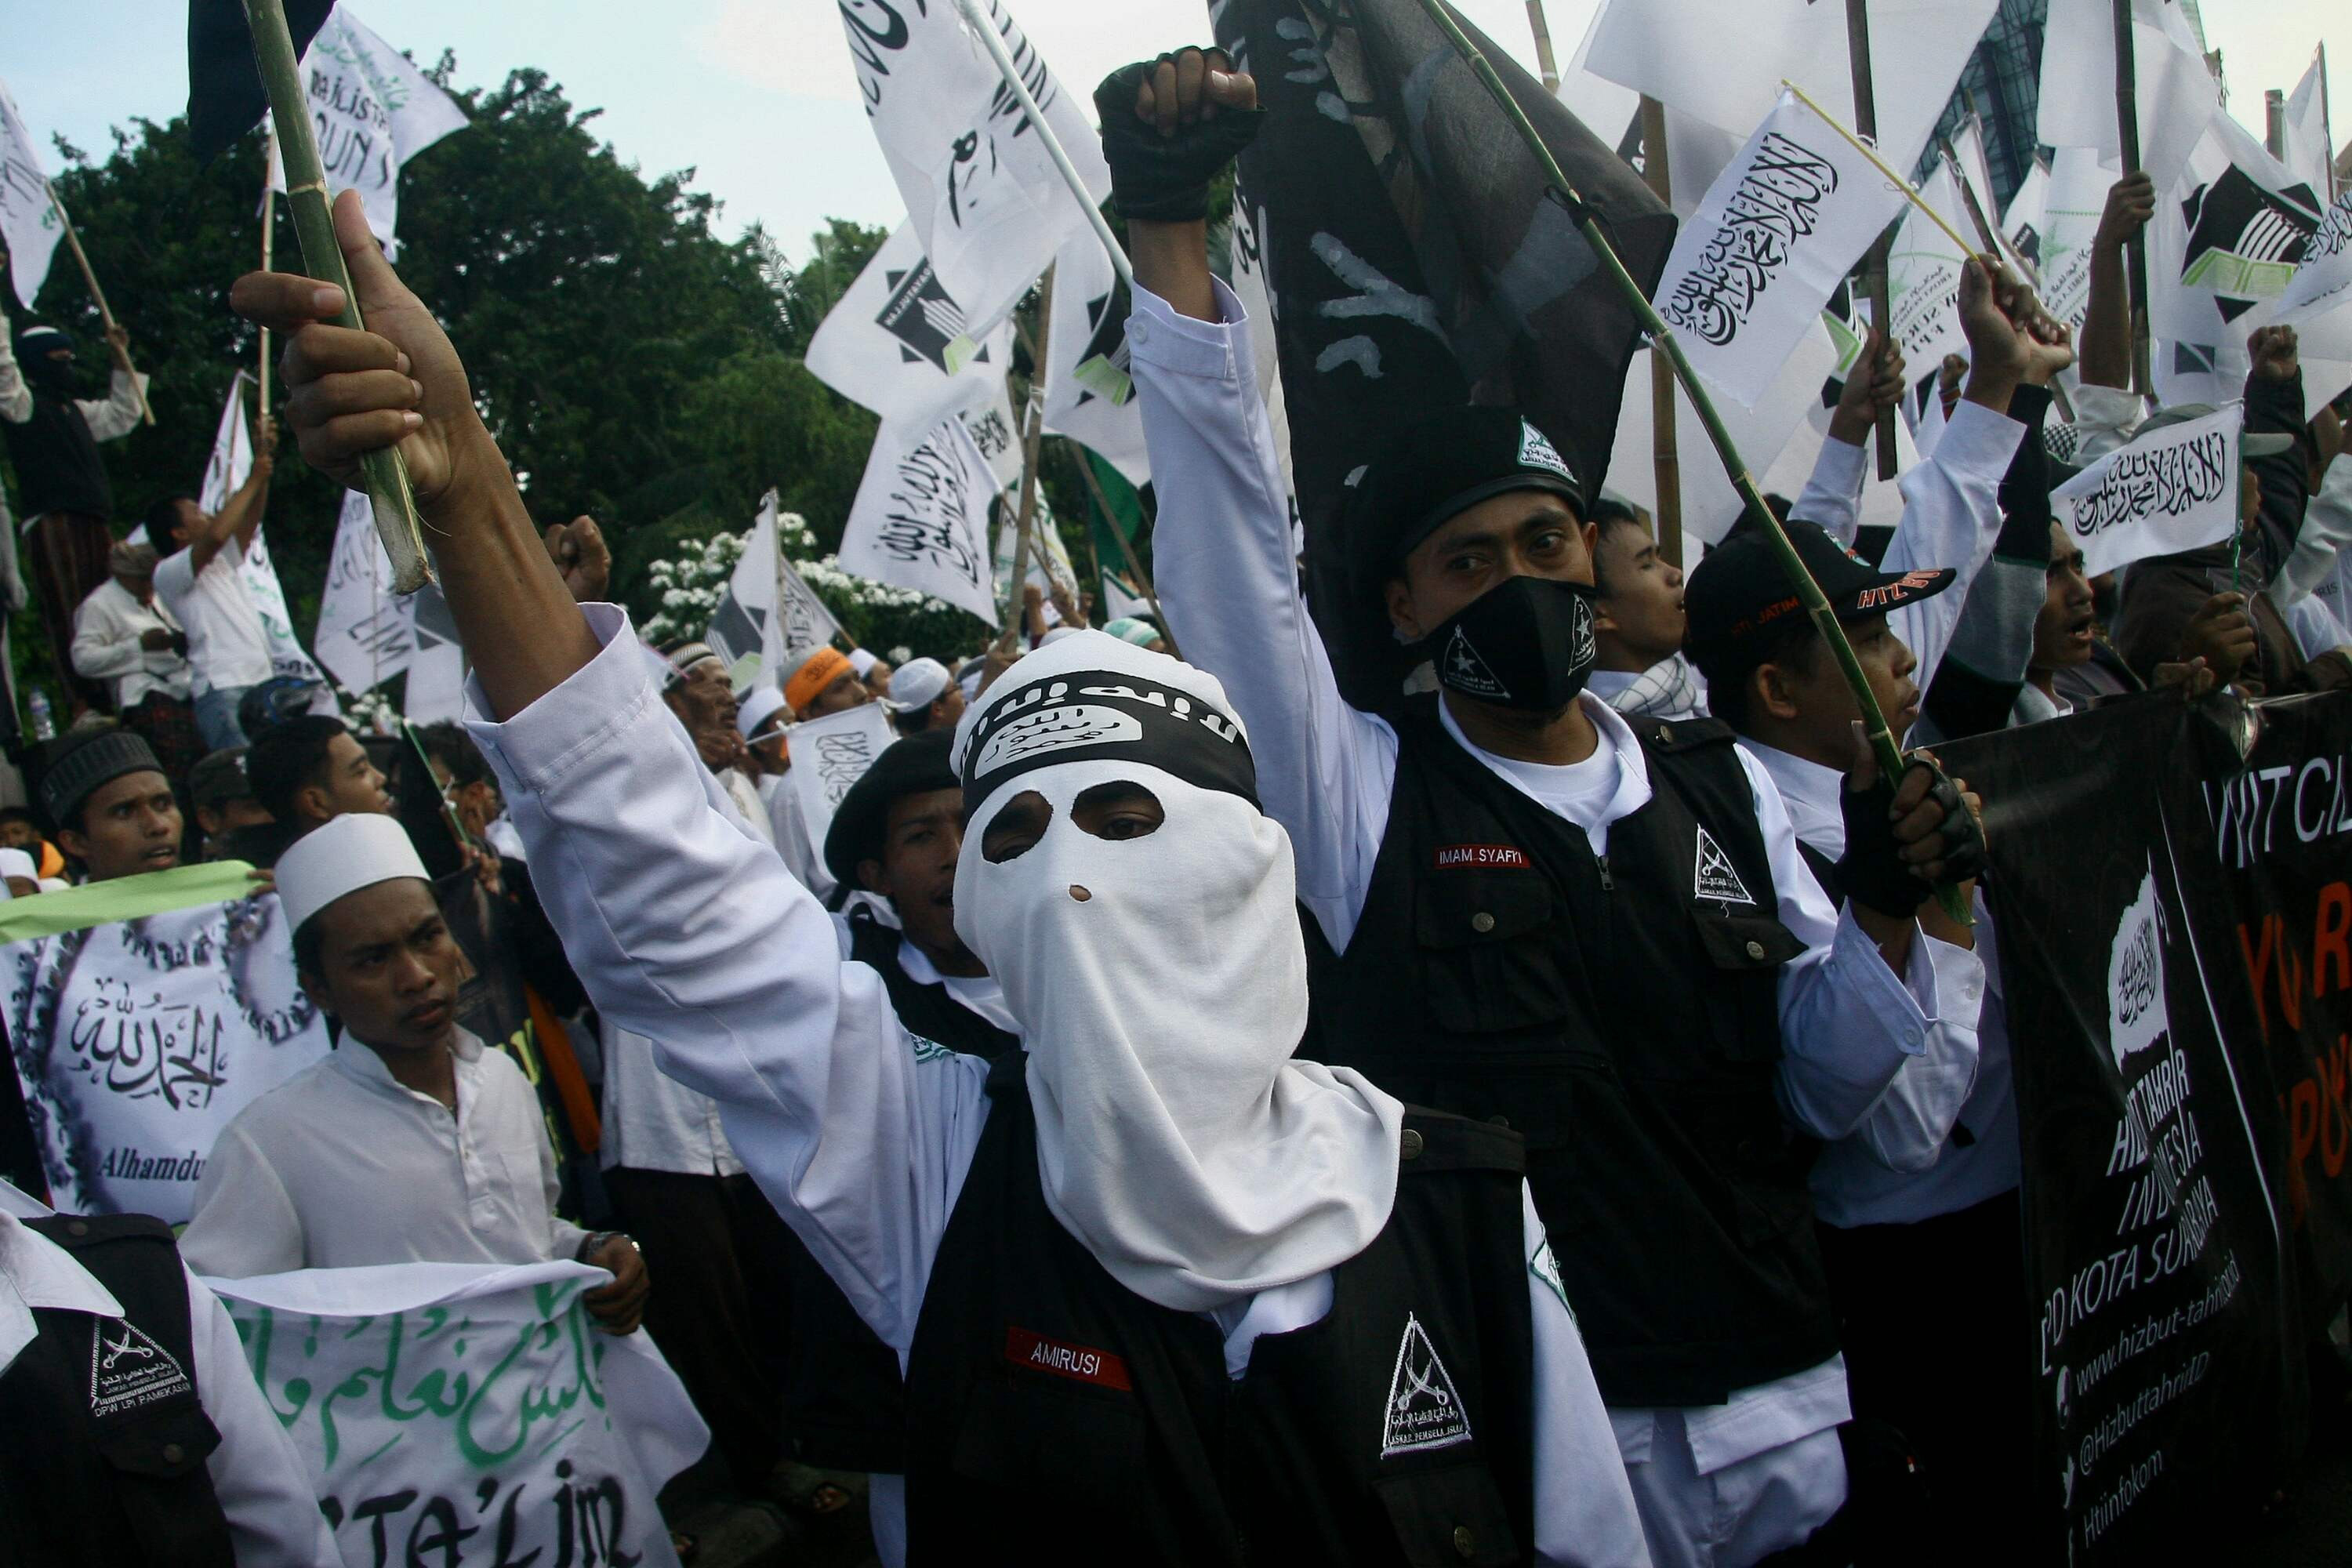 The Islamic Defenders Front holds a rally to support the closure of Southeast Asia's largest red-light area, Dolly, in the Indonesian city of Surabaya on June 18, 2014 (Anadolu Agency—Getty Images)